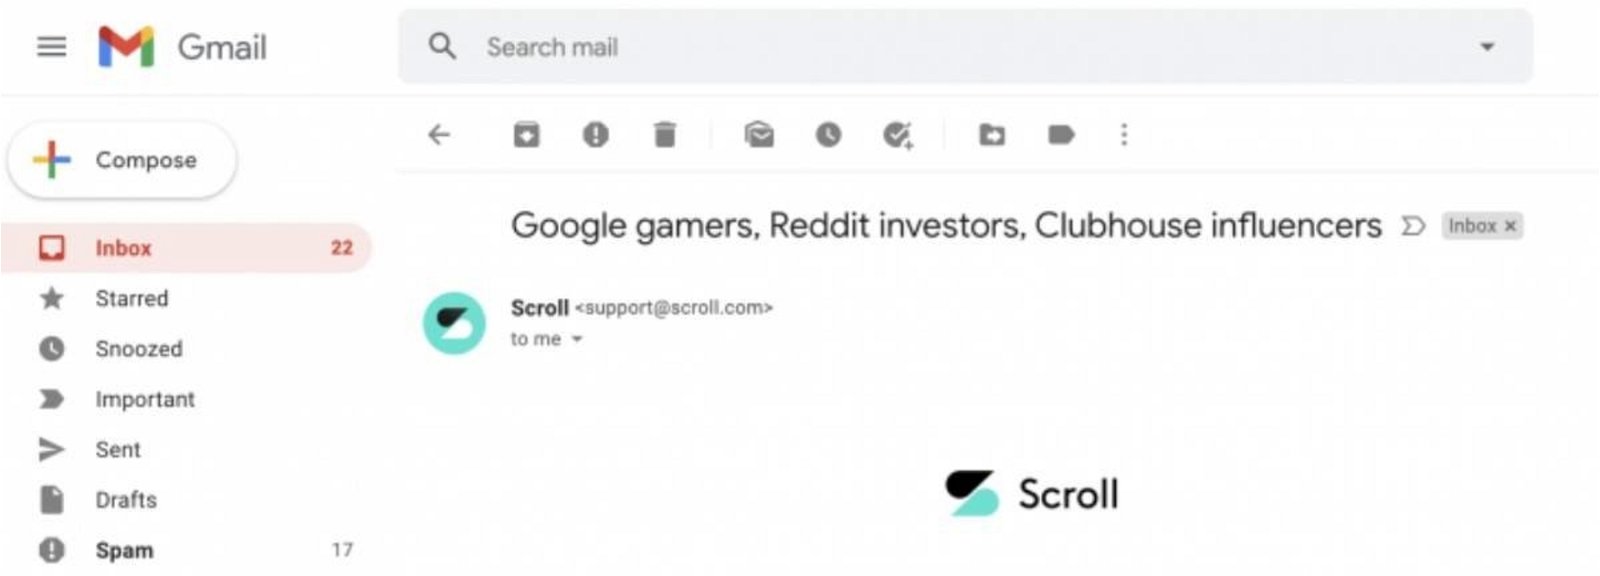 This is the new design of Gmail for desktop